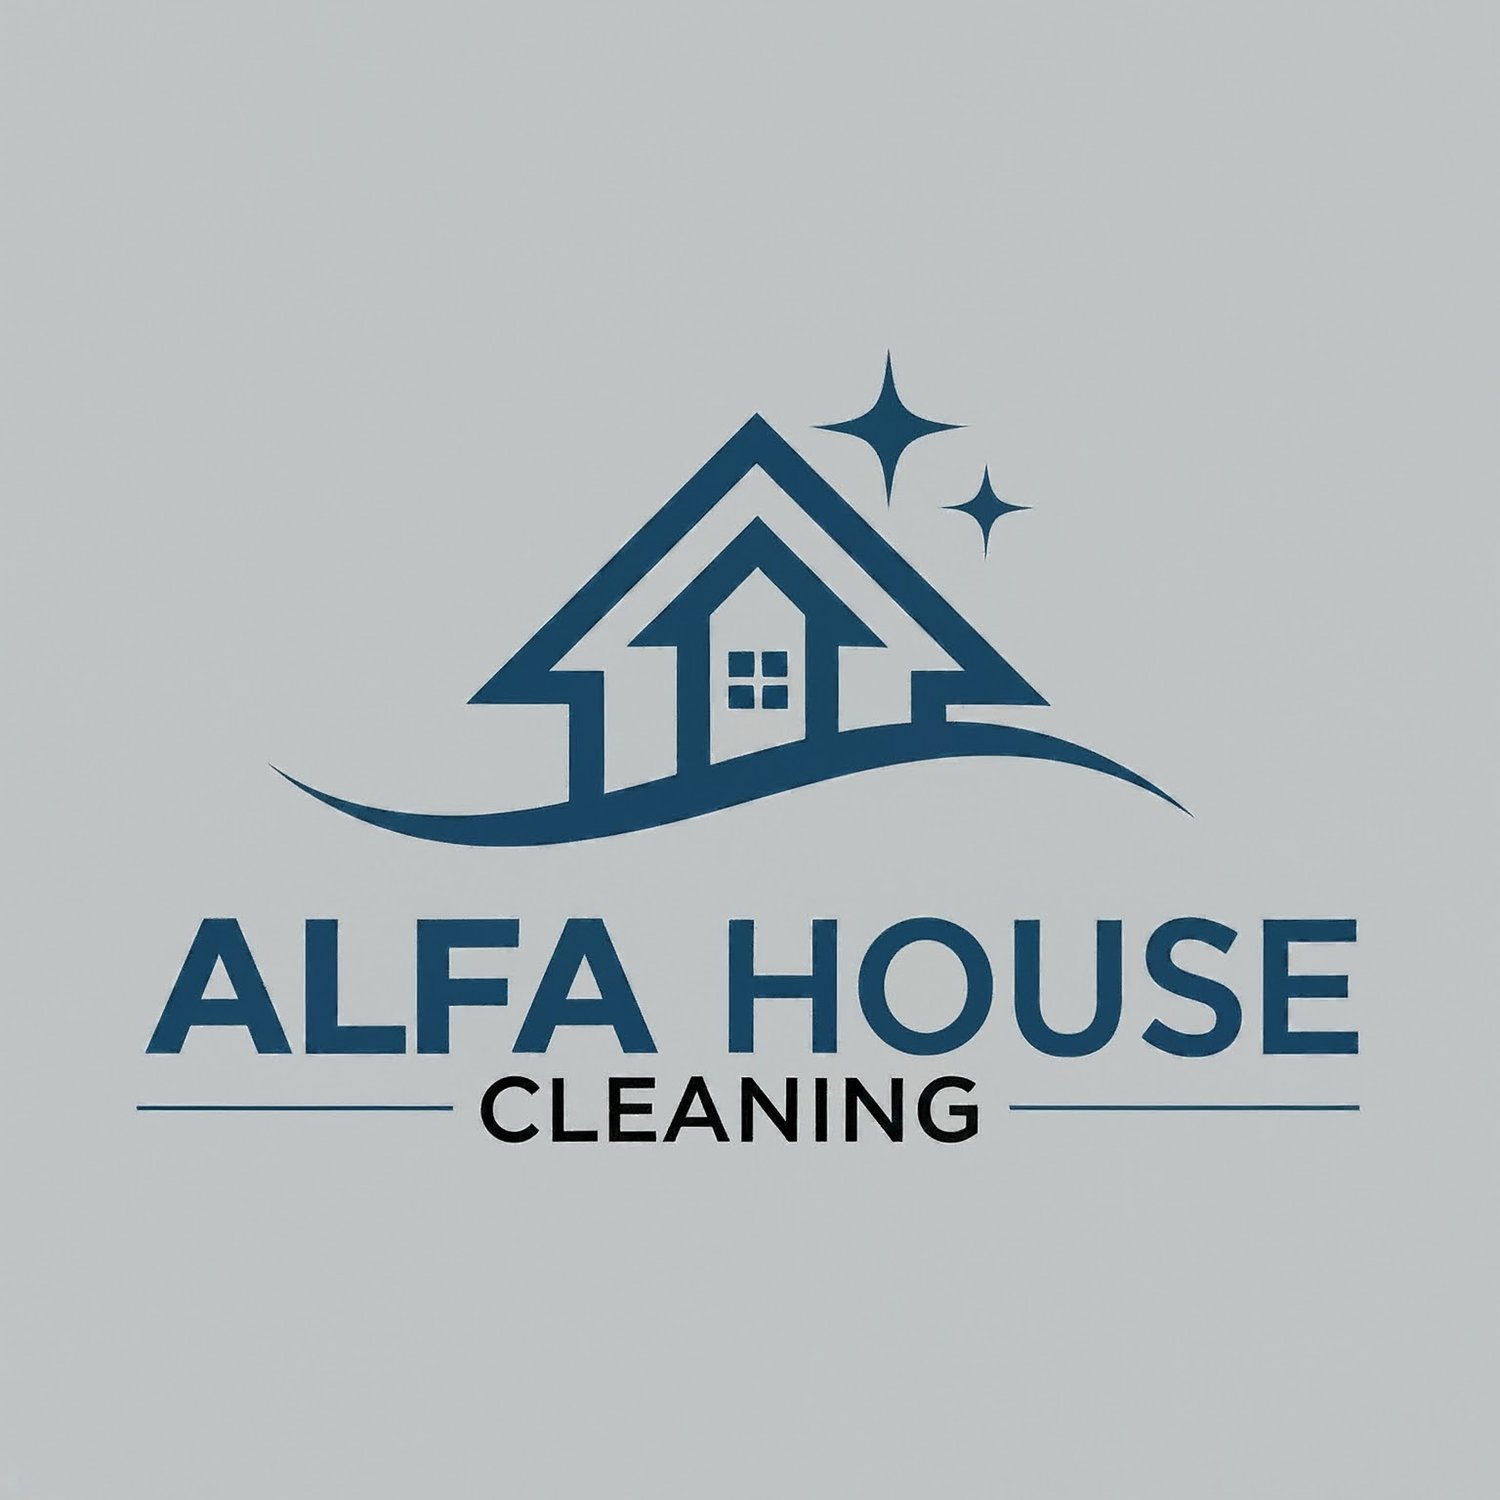 Alfa House Cleaning